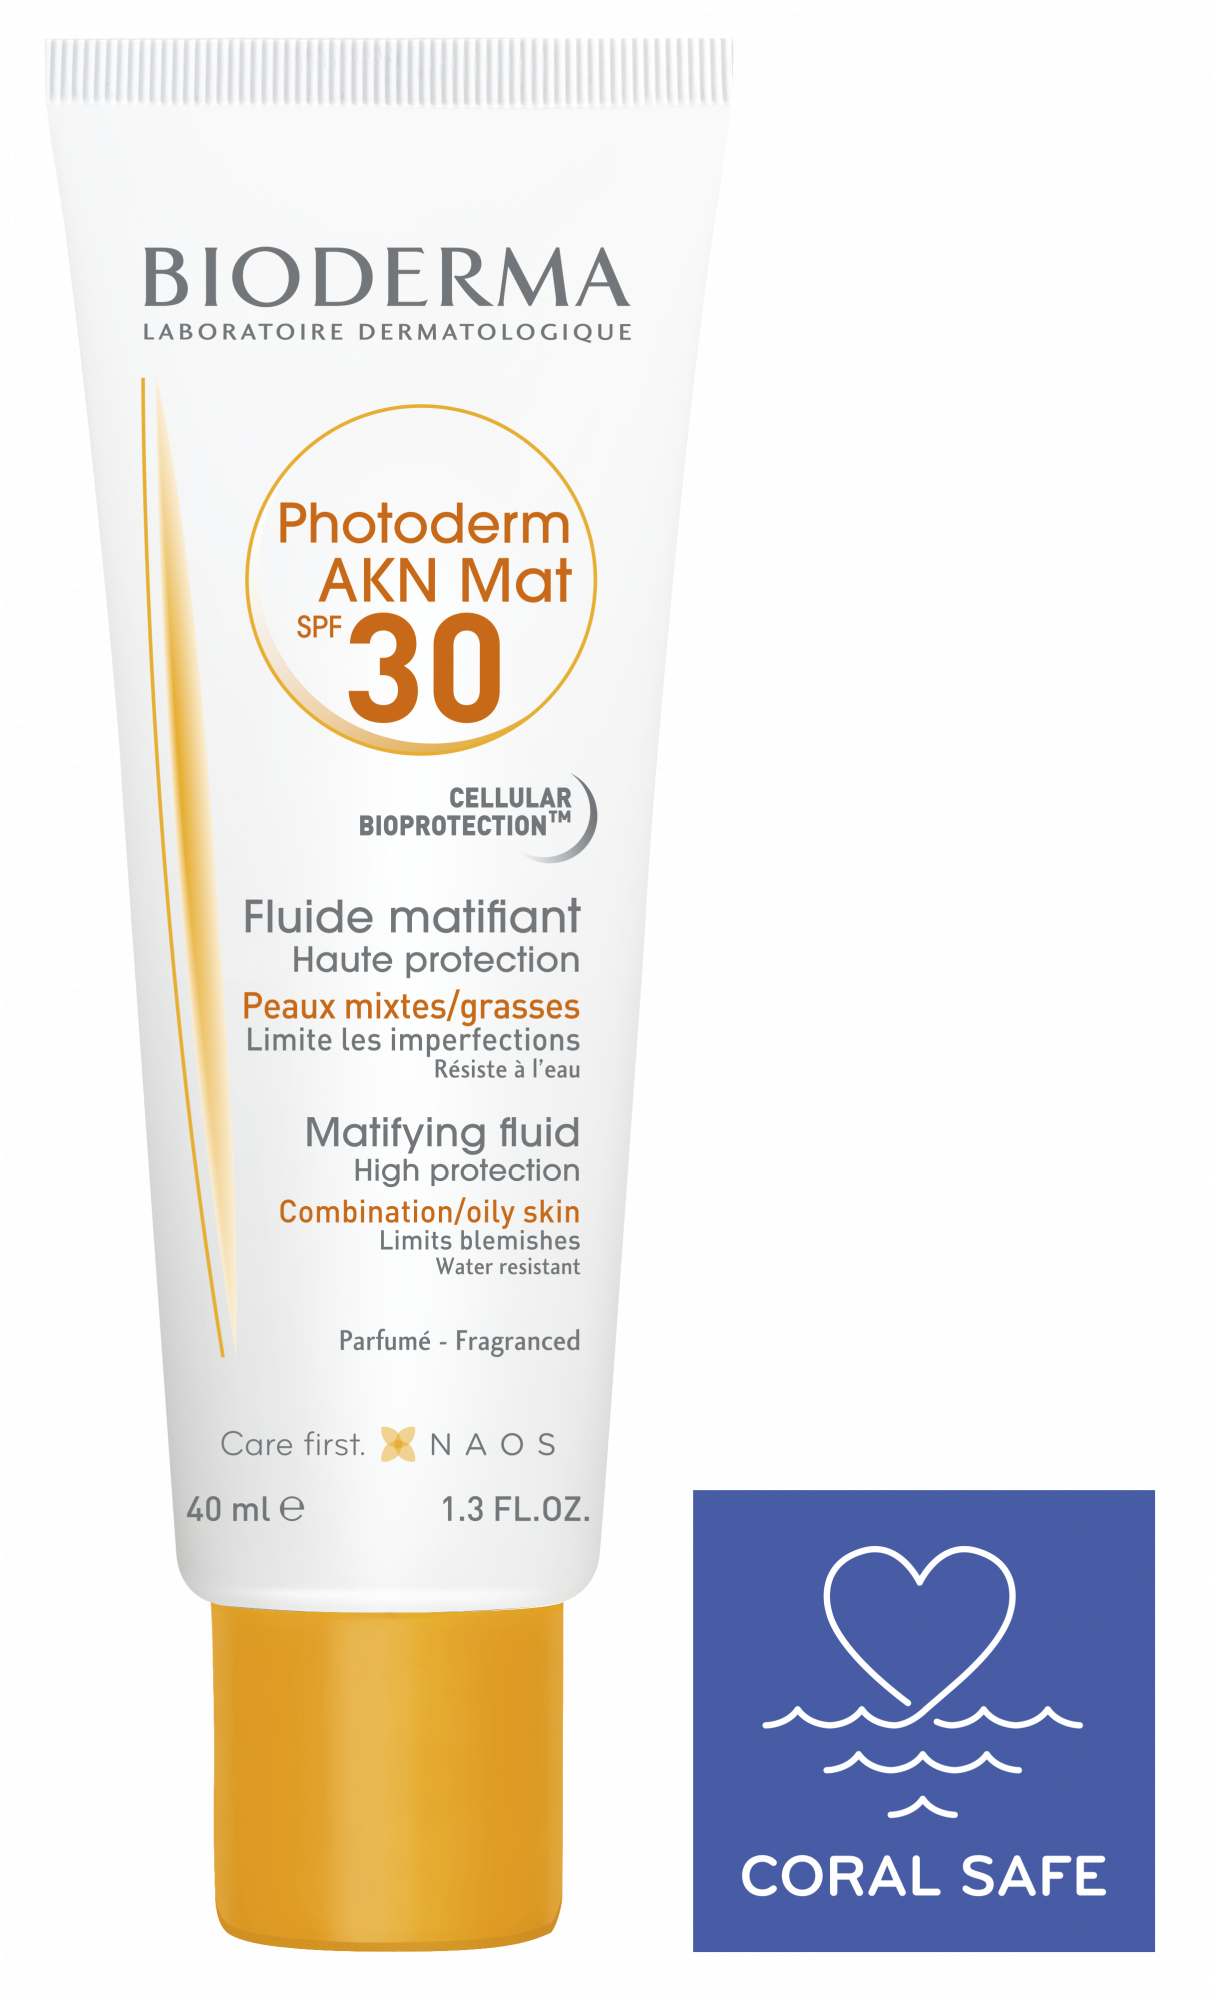 https://www.bioderma.ae/sites/ae/files/styles/fancybox_2000_2000/public/products/Photoderm-AKN-Mat-SPF30-T40ml-coral.png?itok=ySvnlulG